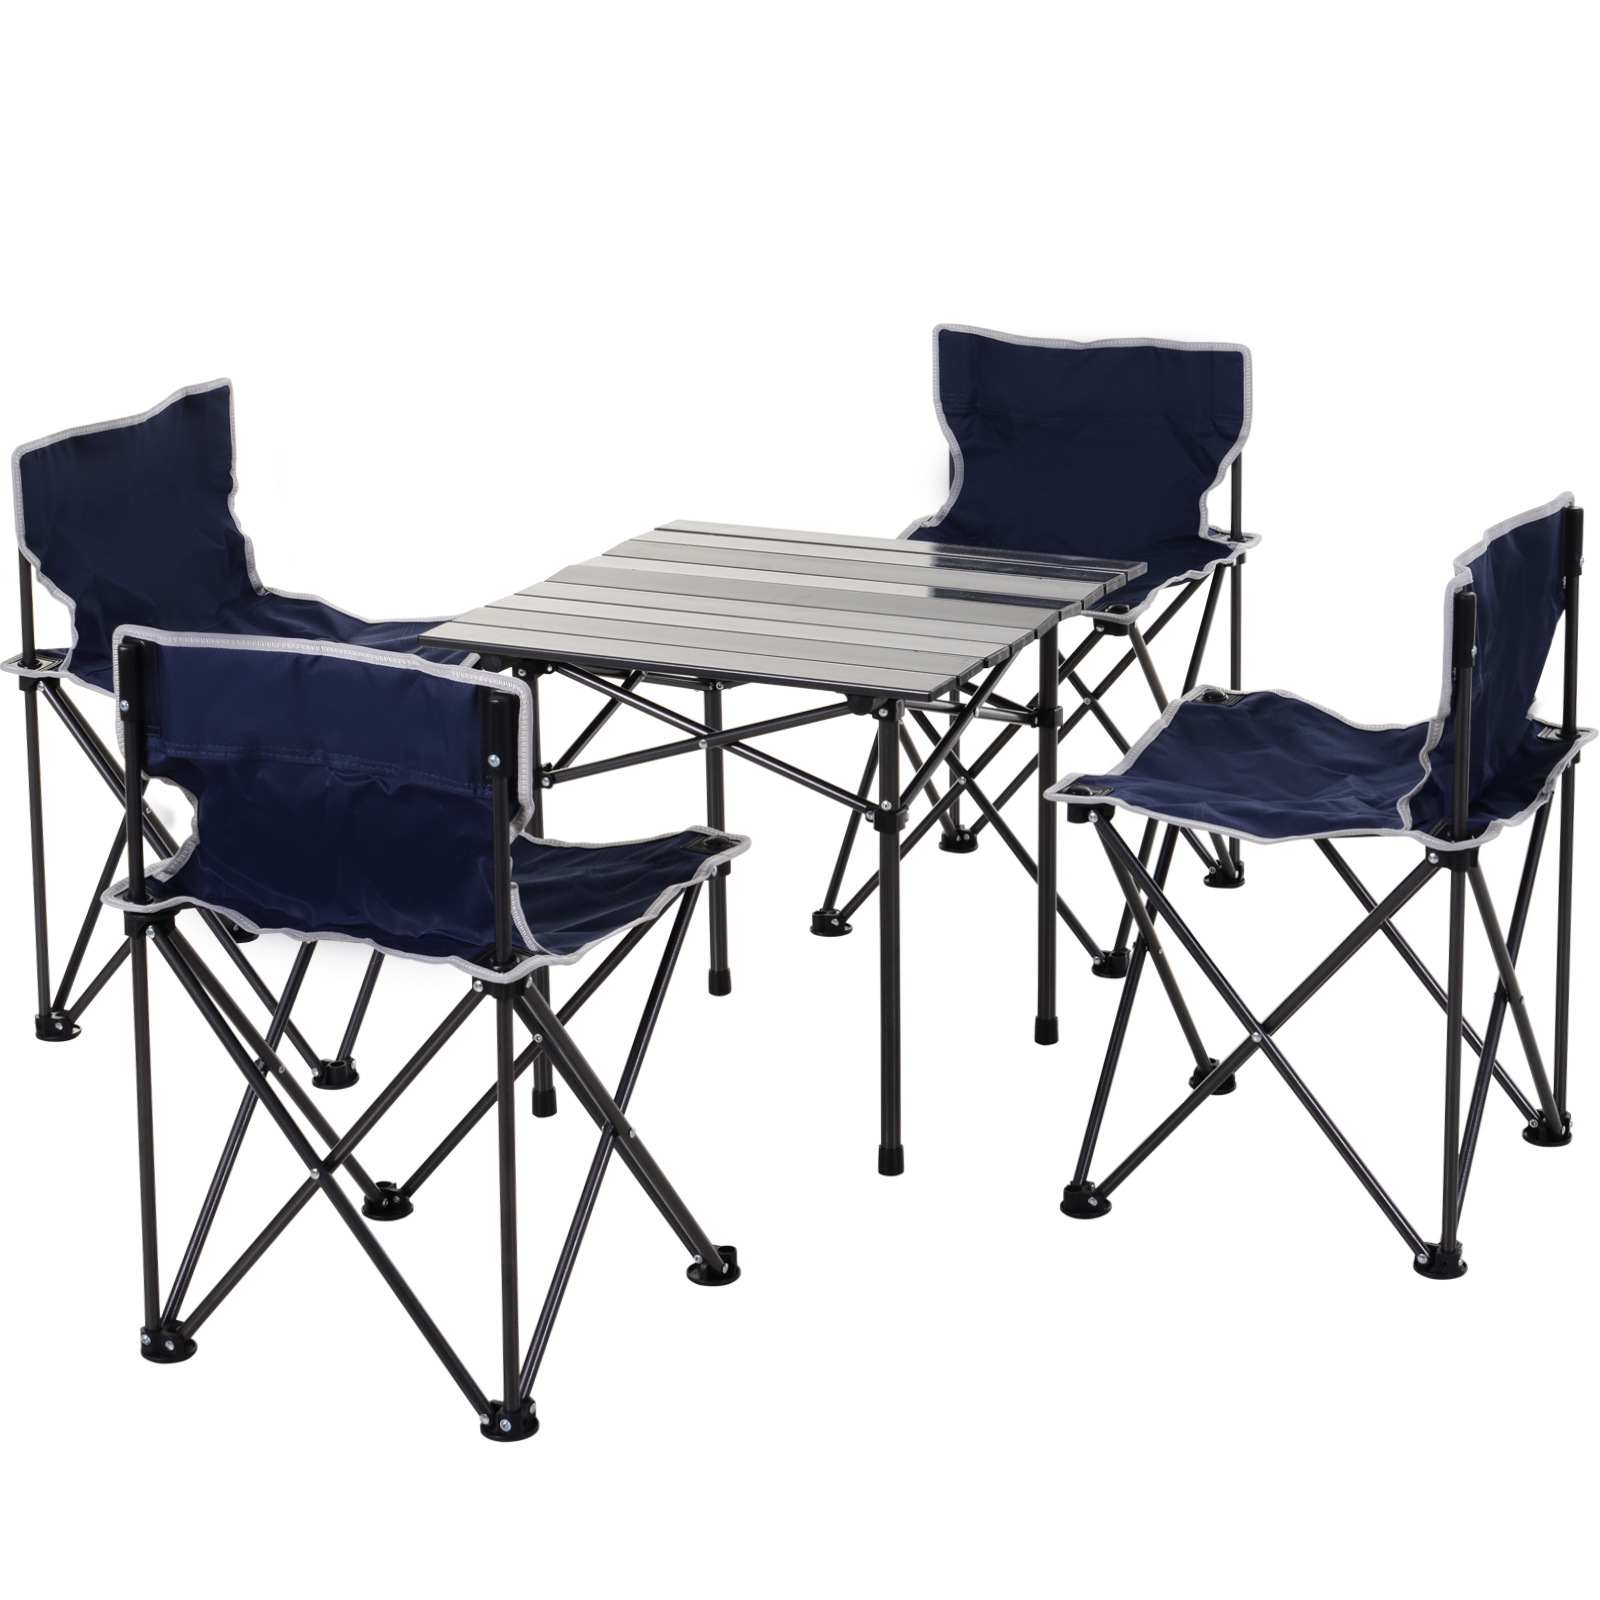 Outsunny 5 Piece Camping Table & Chairs Set with Carrying Bag Foldable Portable